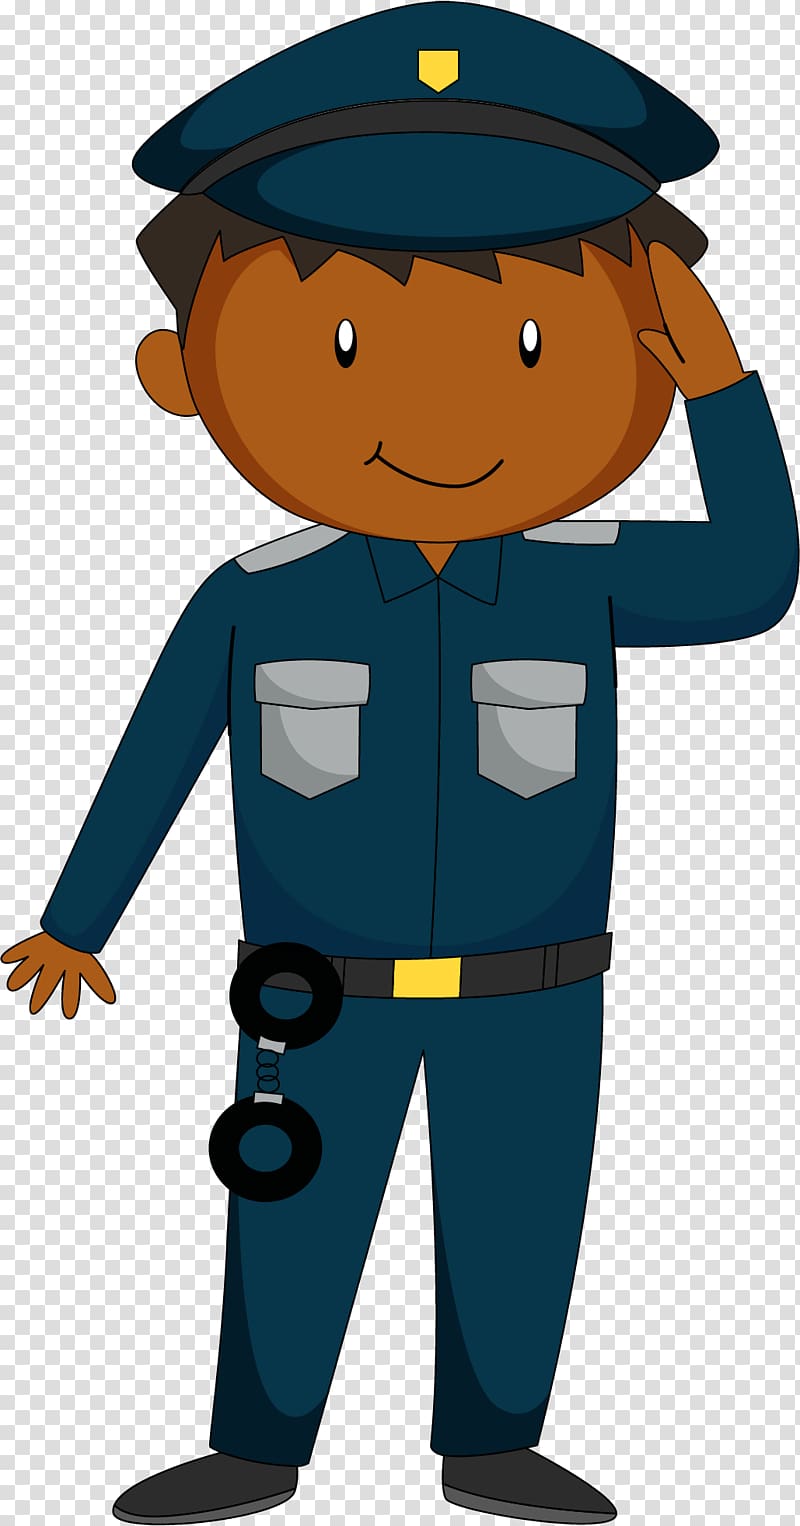 police man illustration, Salute Police officer Cartoon, Cartoon guards salute transparent background PNG clipart